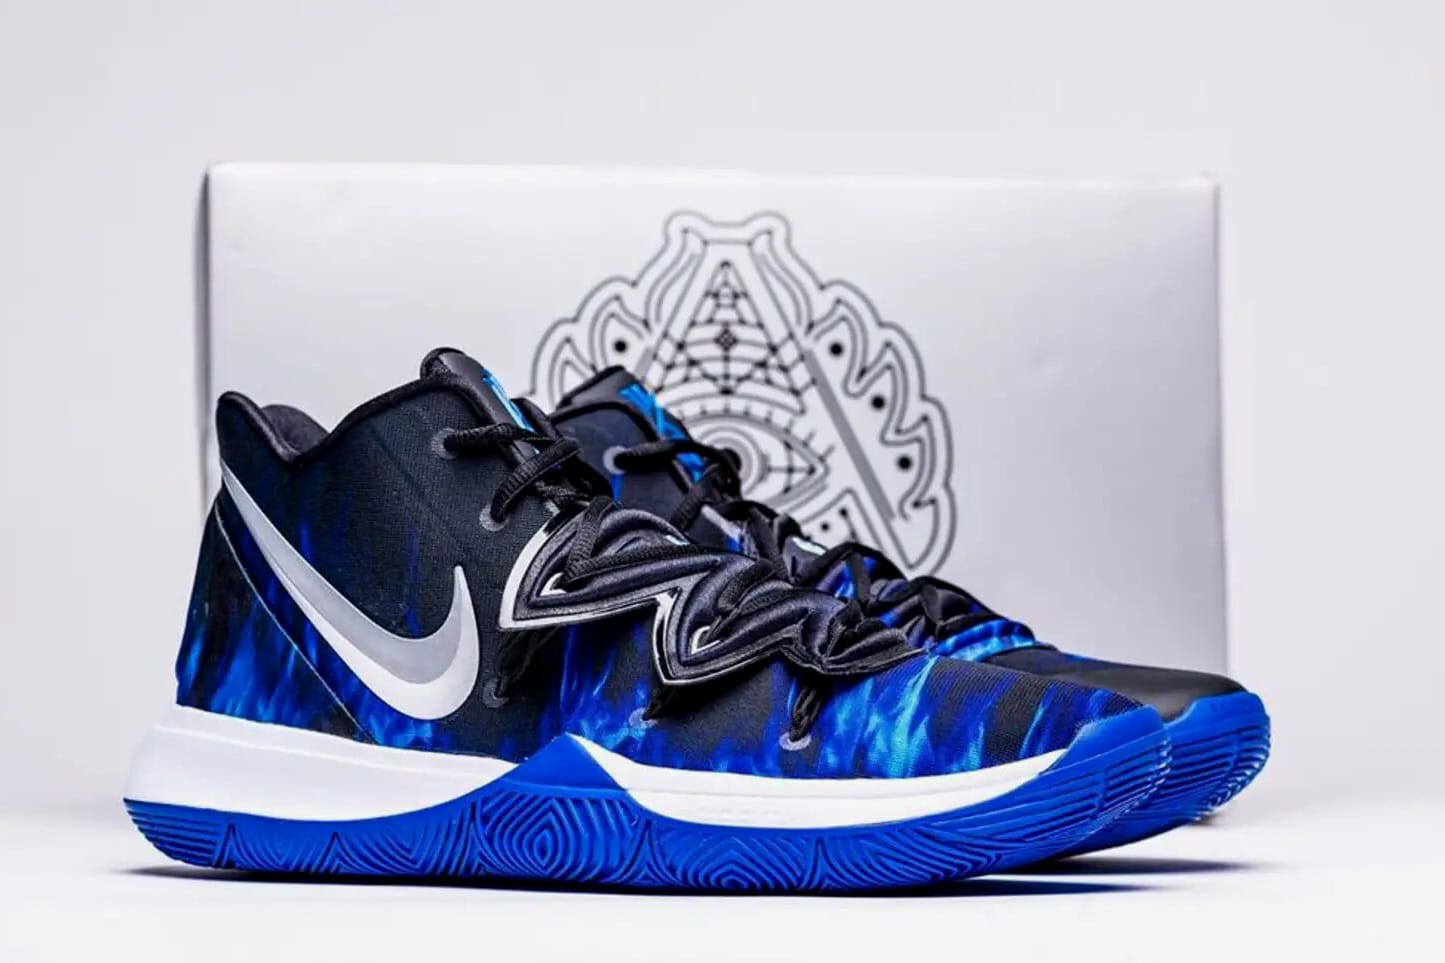 kyrie special edition shoes